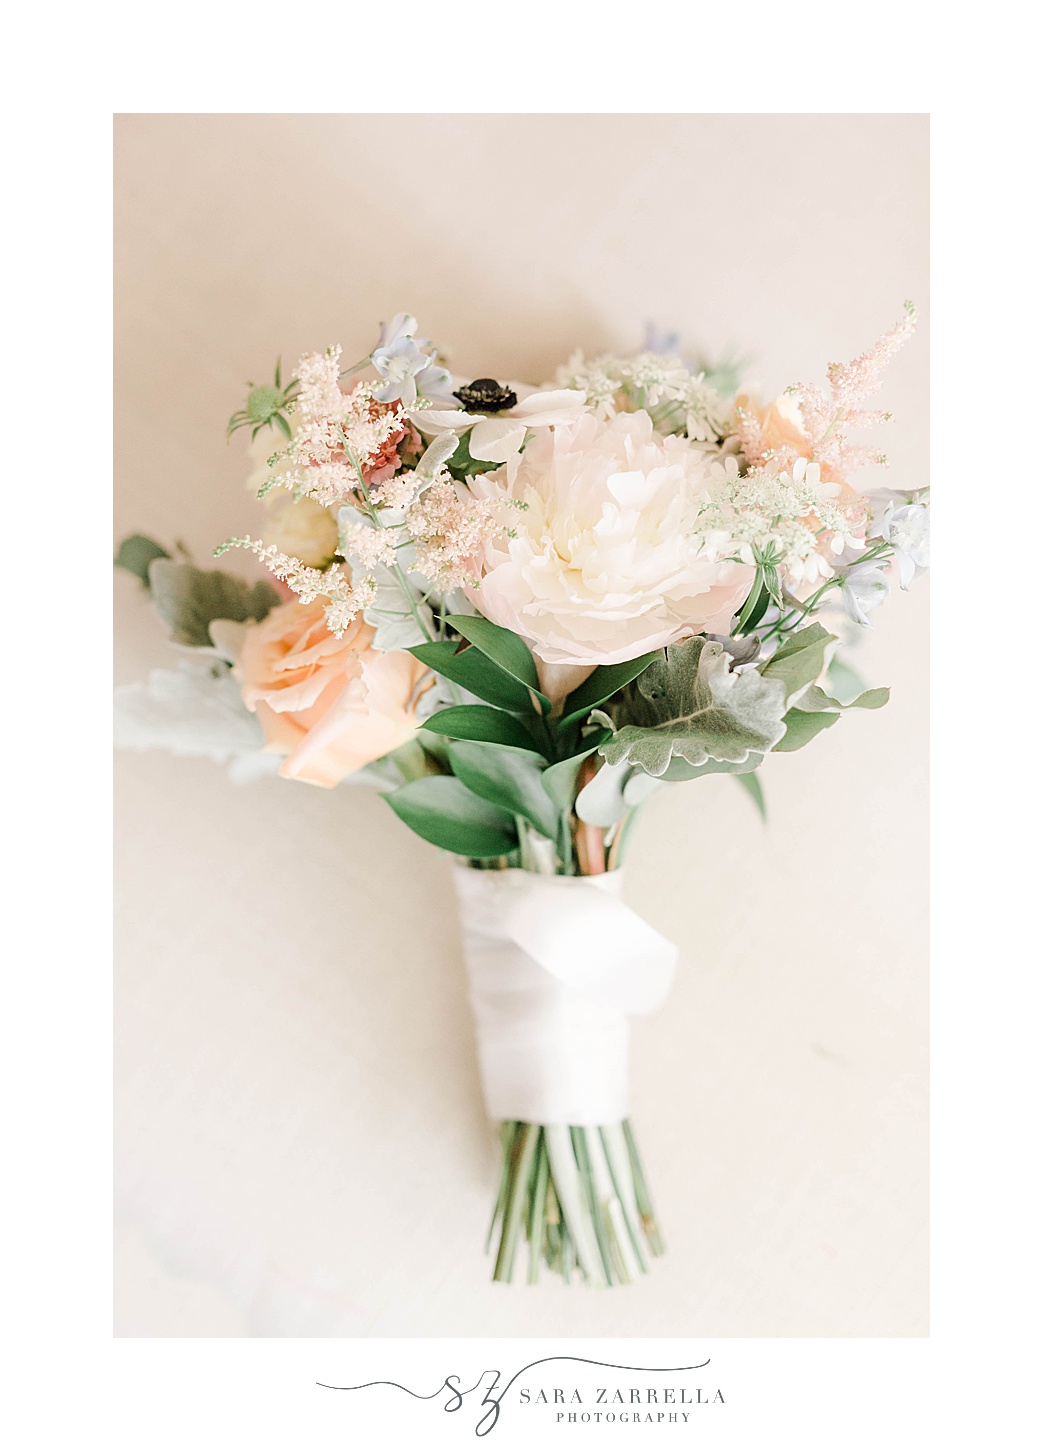 bride's bouquet of white, peach, and blue flowers